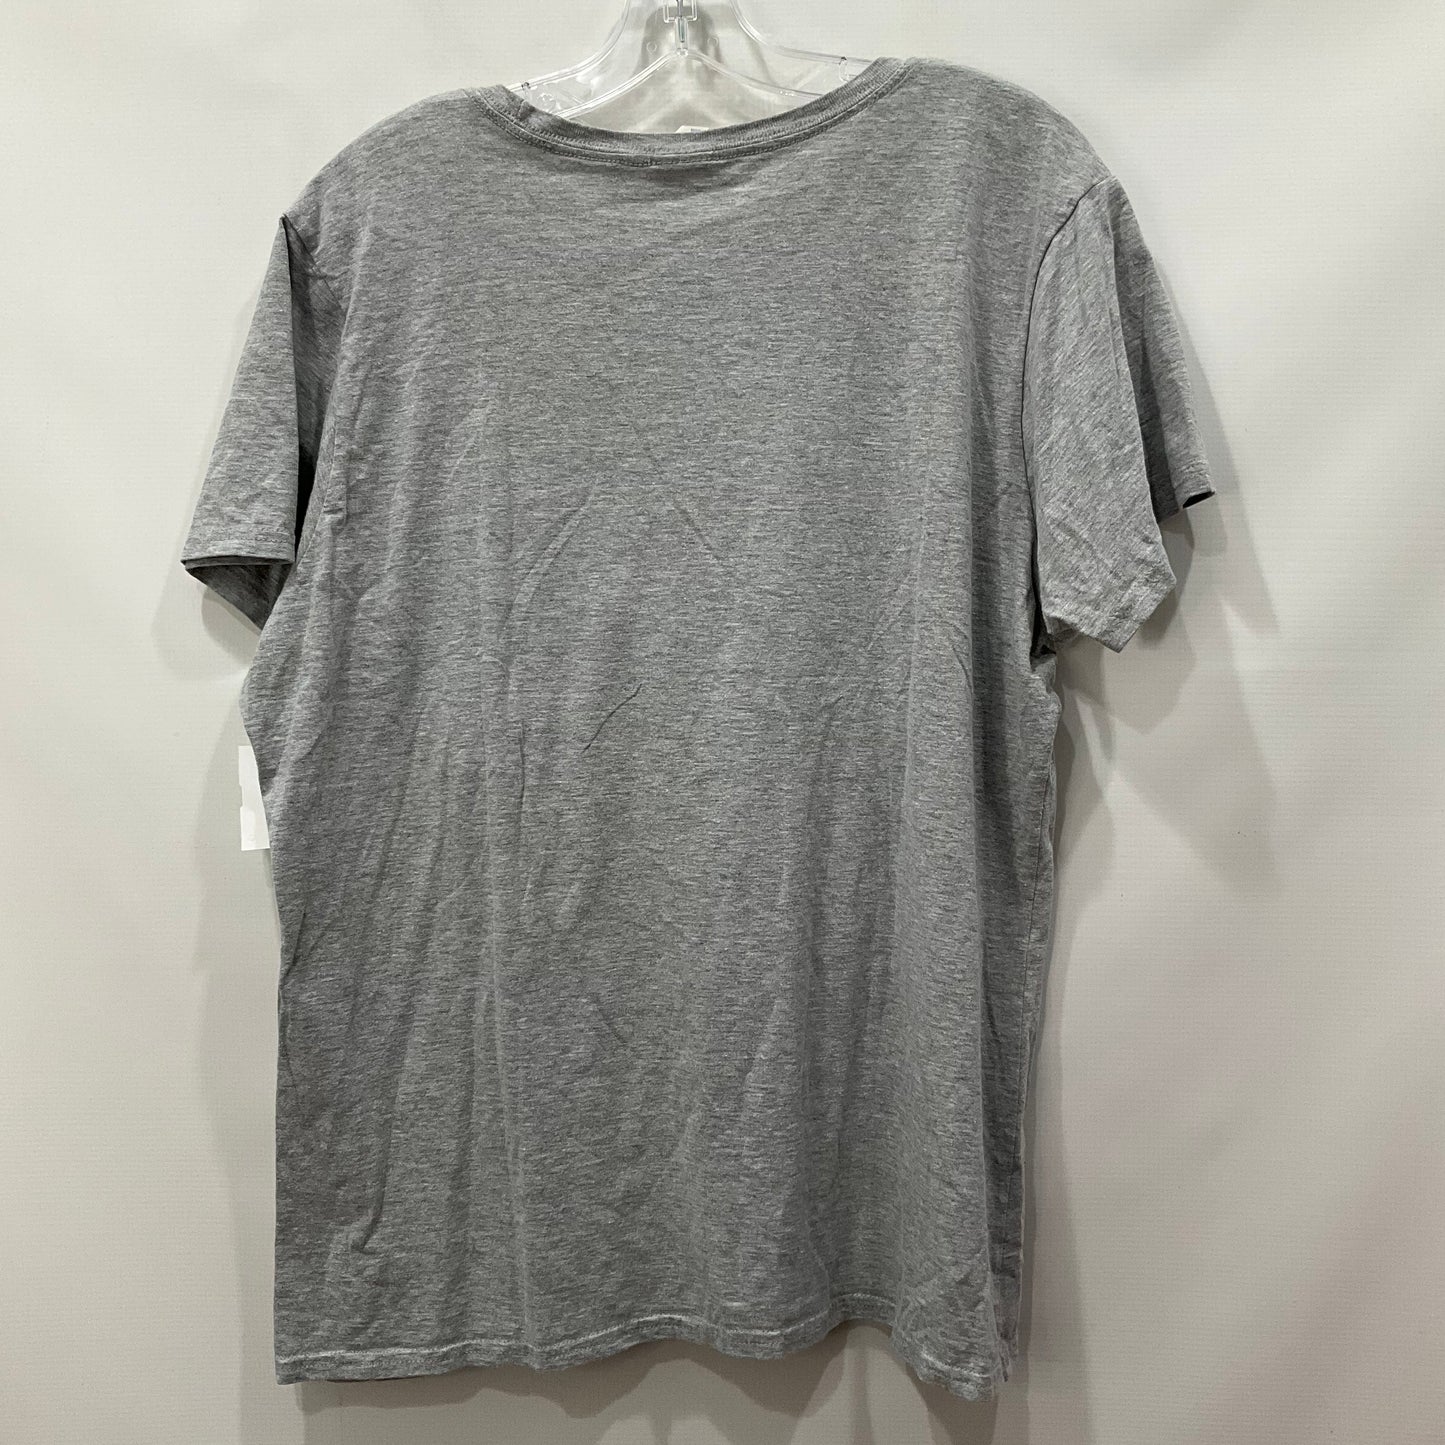 Grey Top Short Sleeve port and company Size Xxl